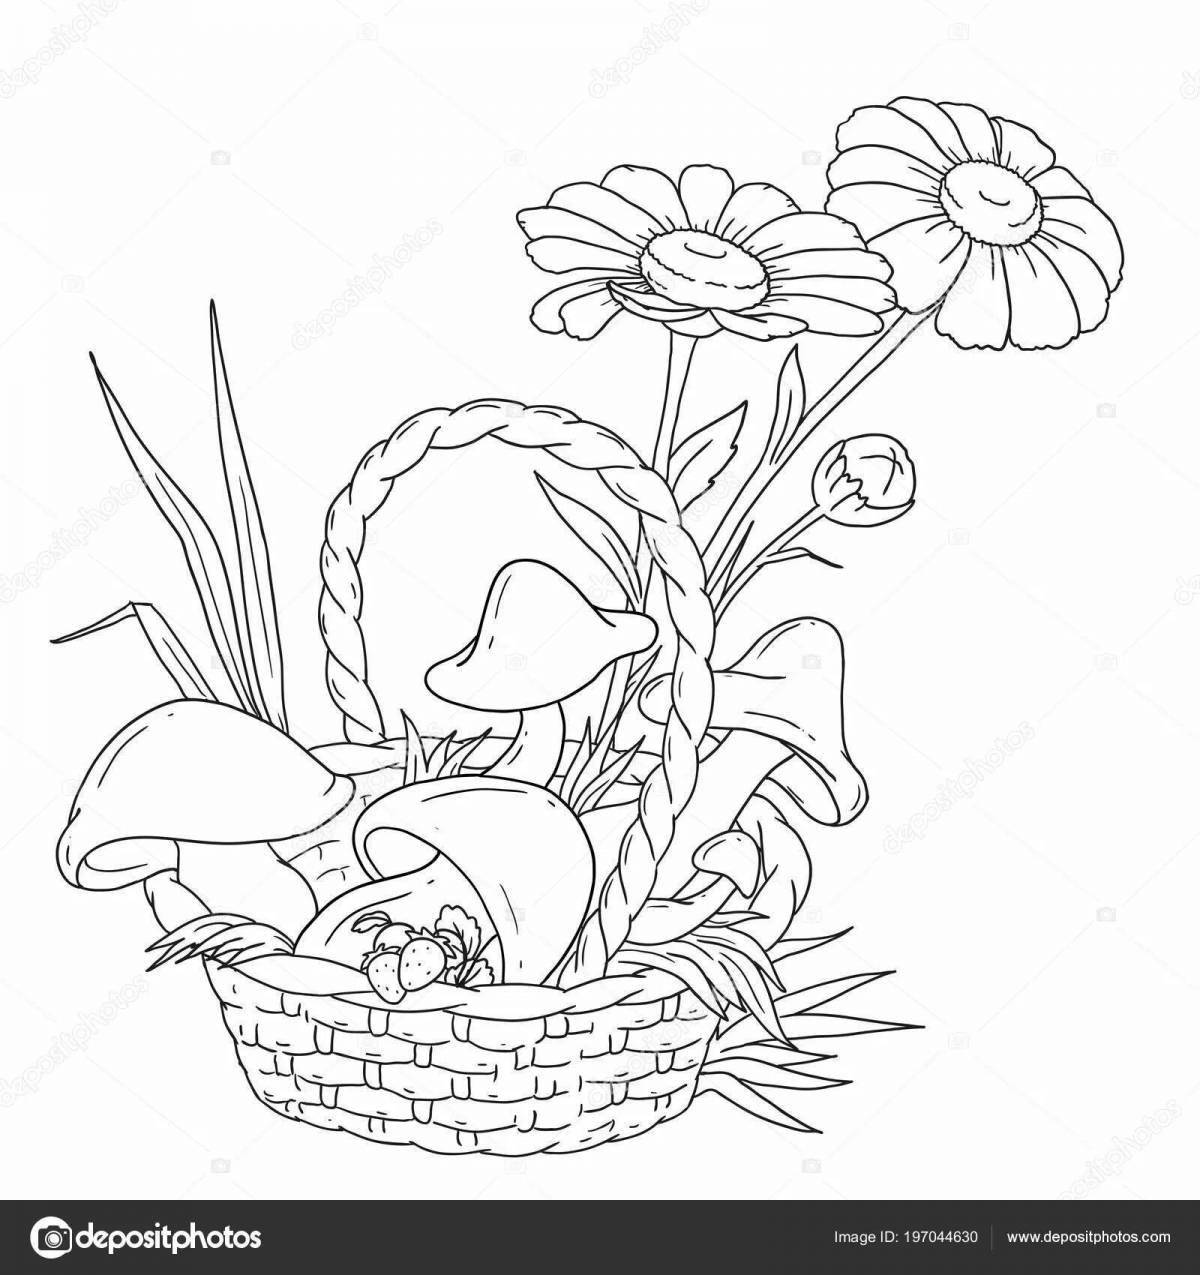 Coloring fairy basket with mushrooms